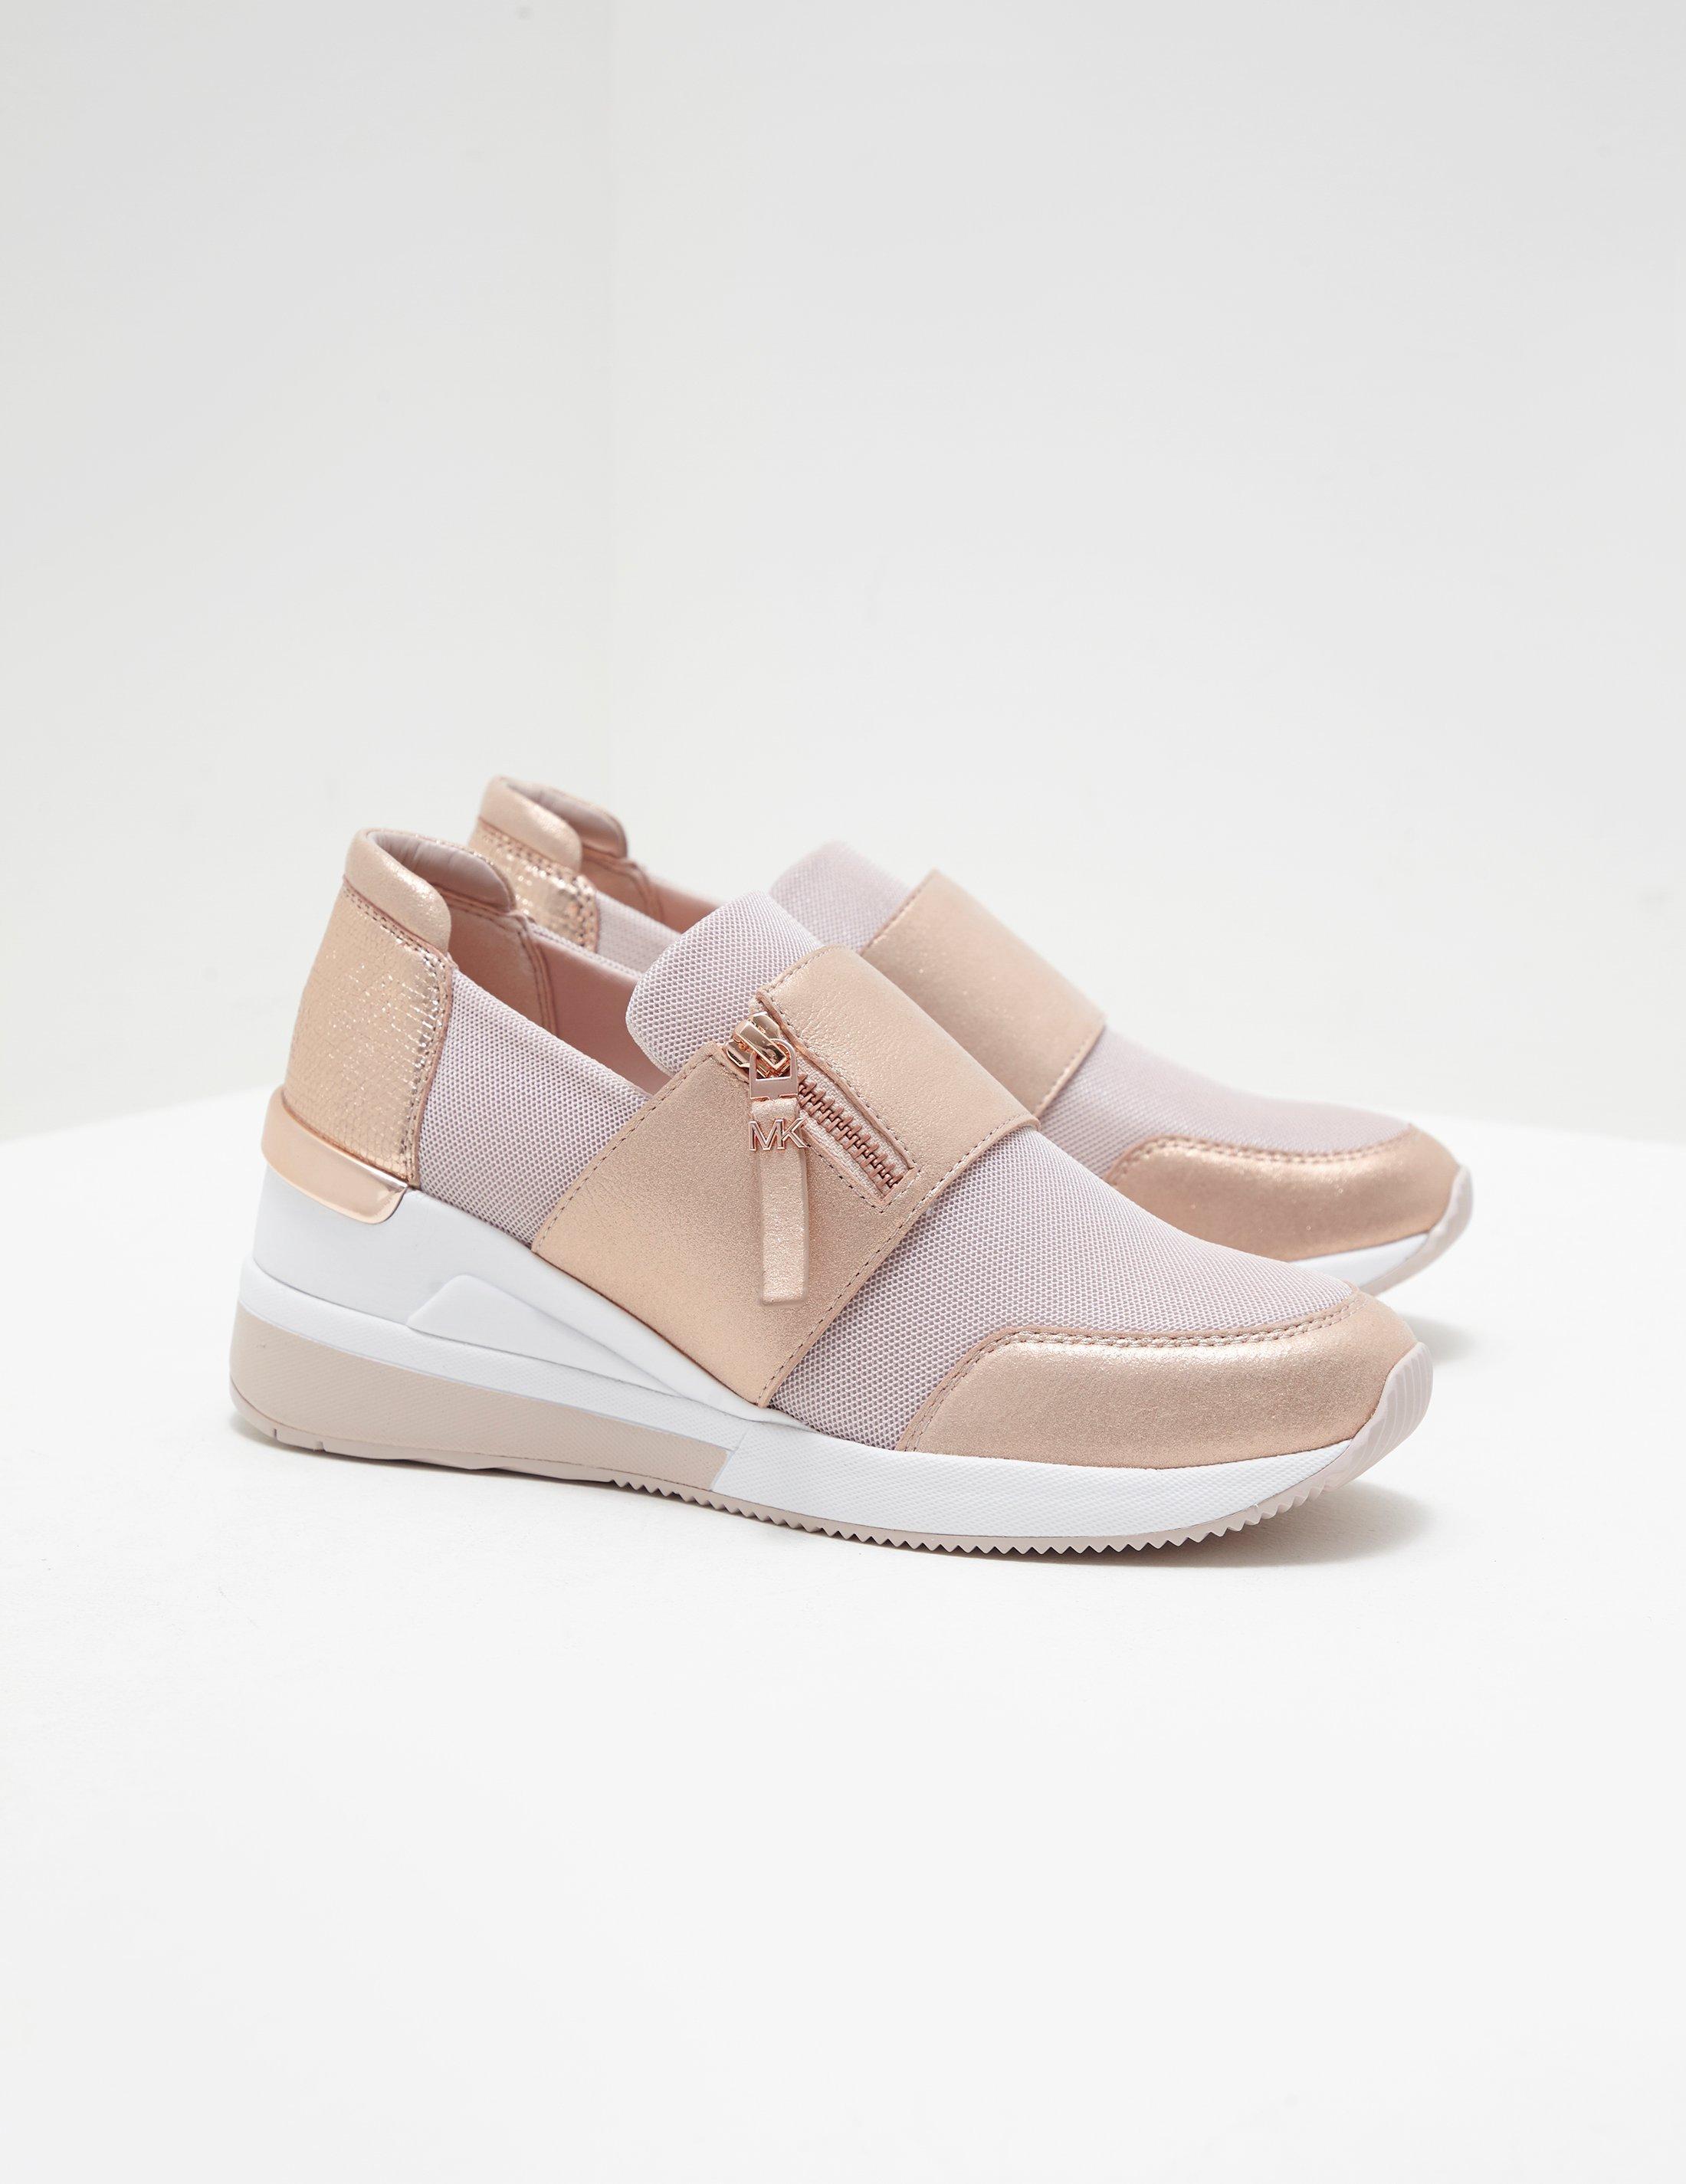 Michael Kors Leather Chelsie Trainers - Online Exclusive Pink - Lyst